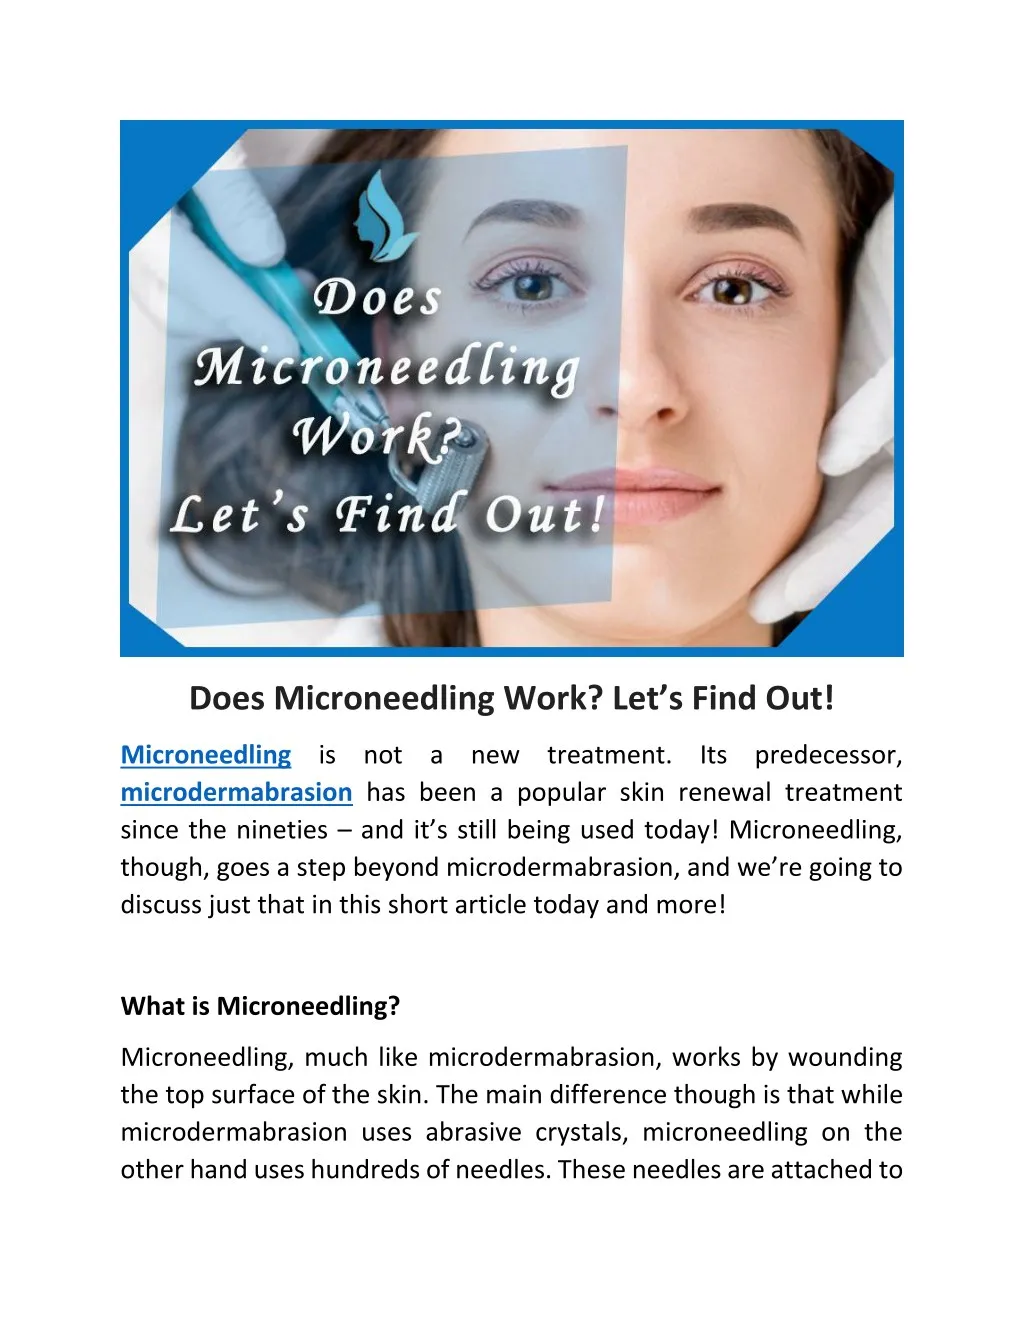 does microneedling work let s find out